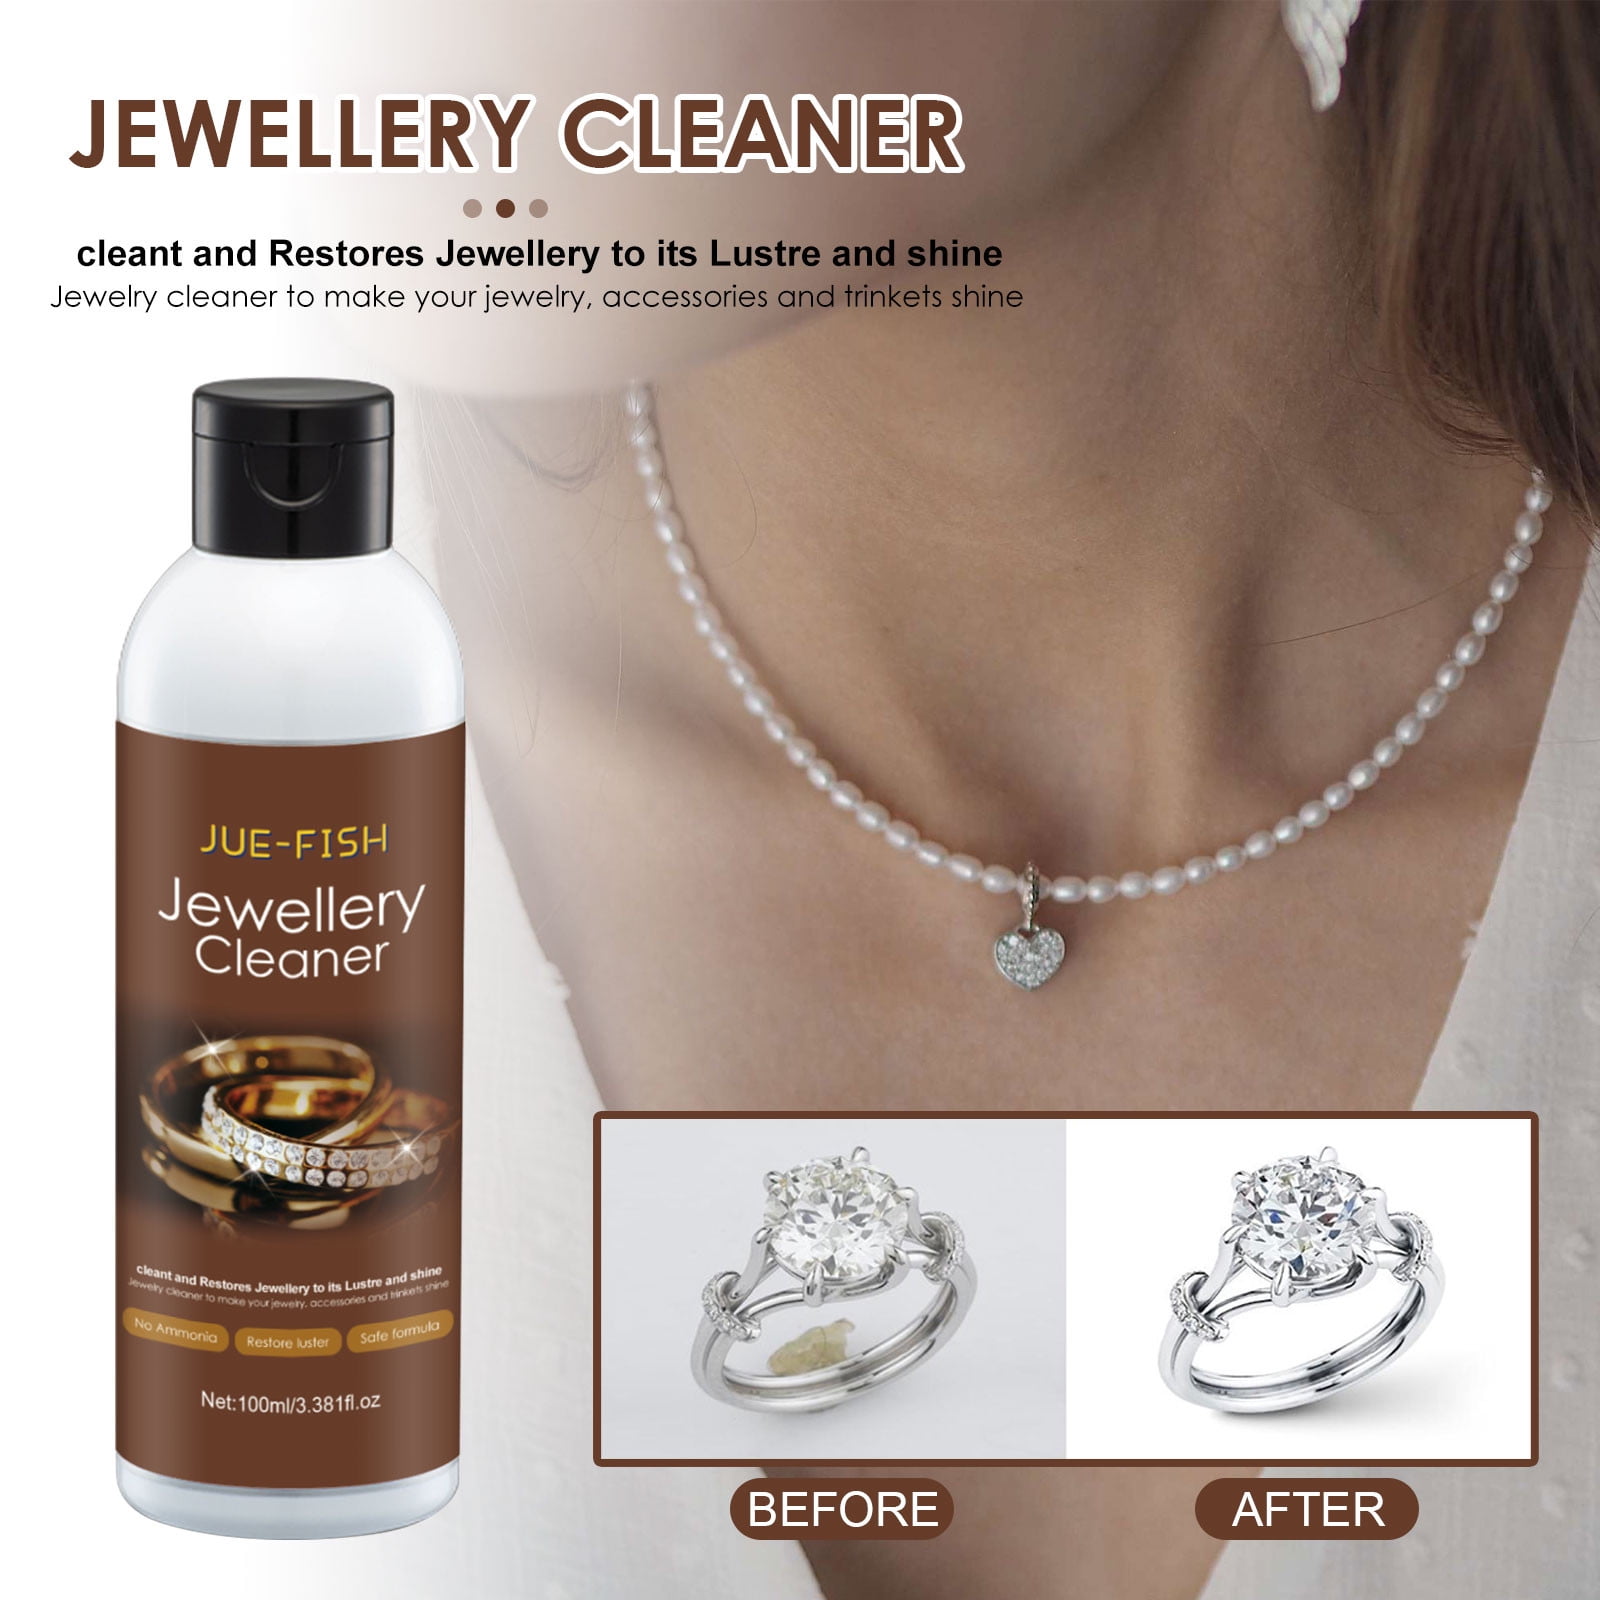 Weiman Jewelry Cleaner Liquid – Restores Shine and Brilliance to